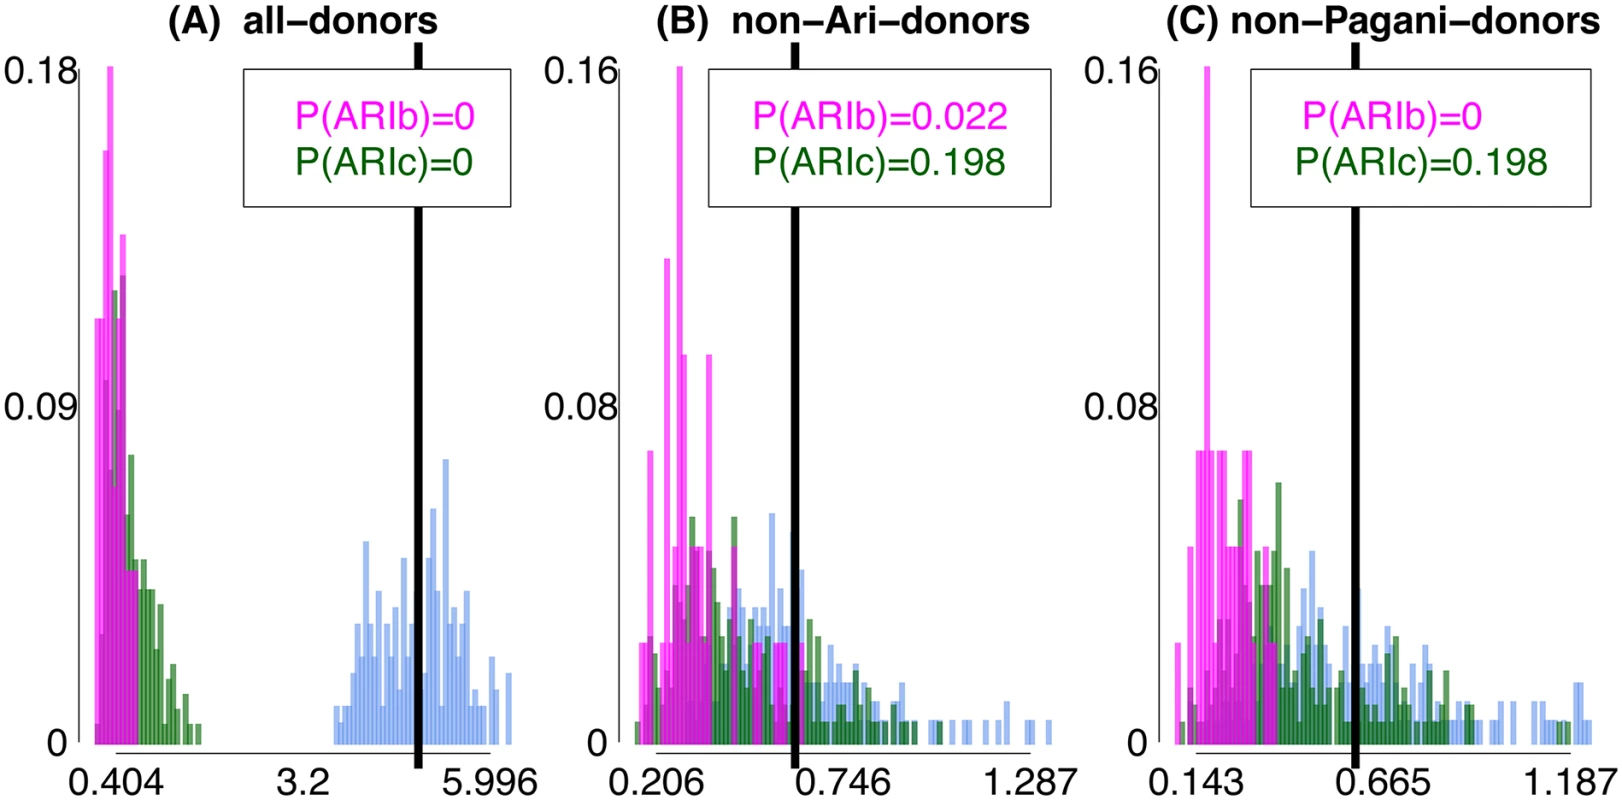 Differences in inferred ancestry under analyses (A)-(C) using <i>F</i><sub><i>XY</i></sub>.